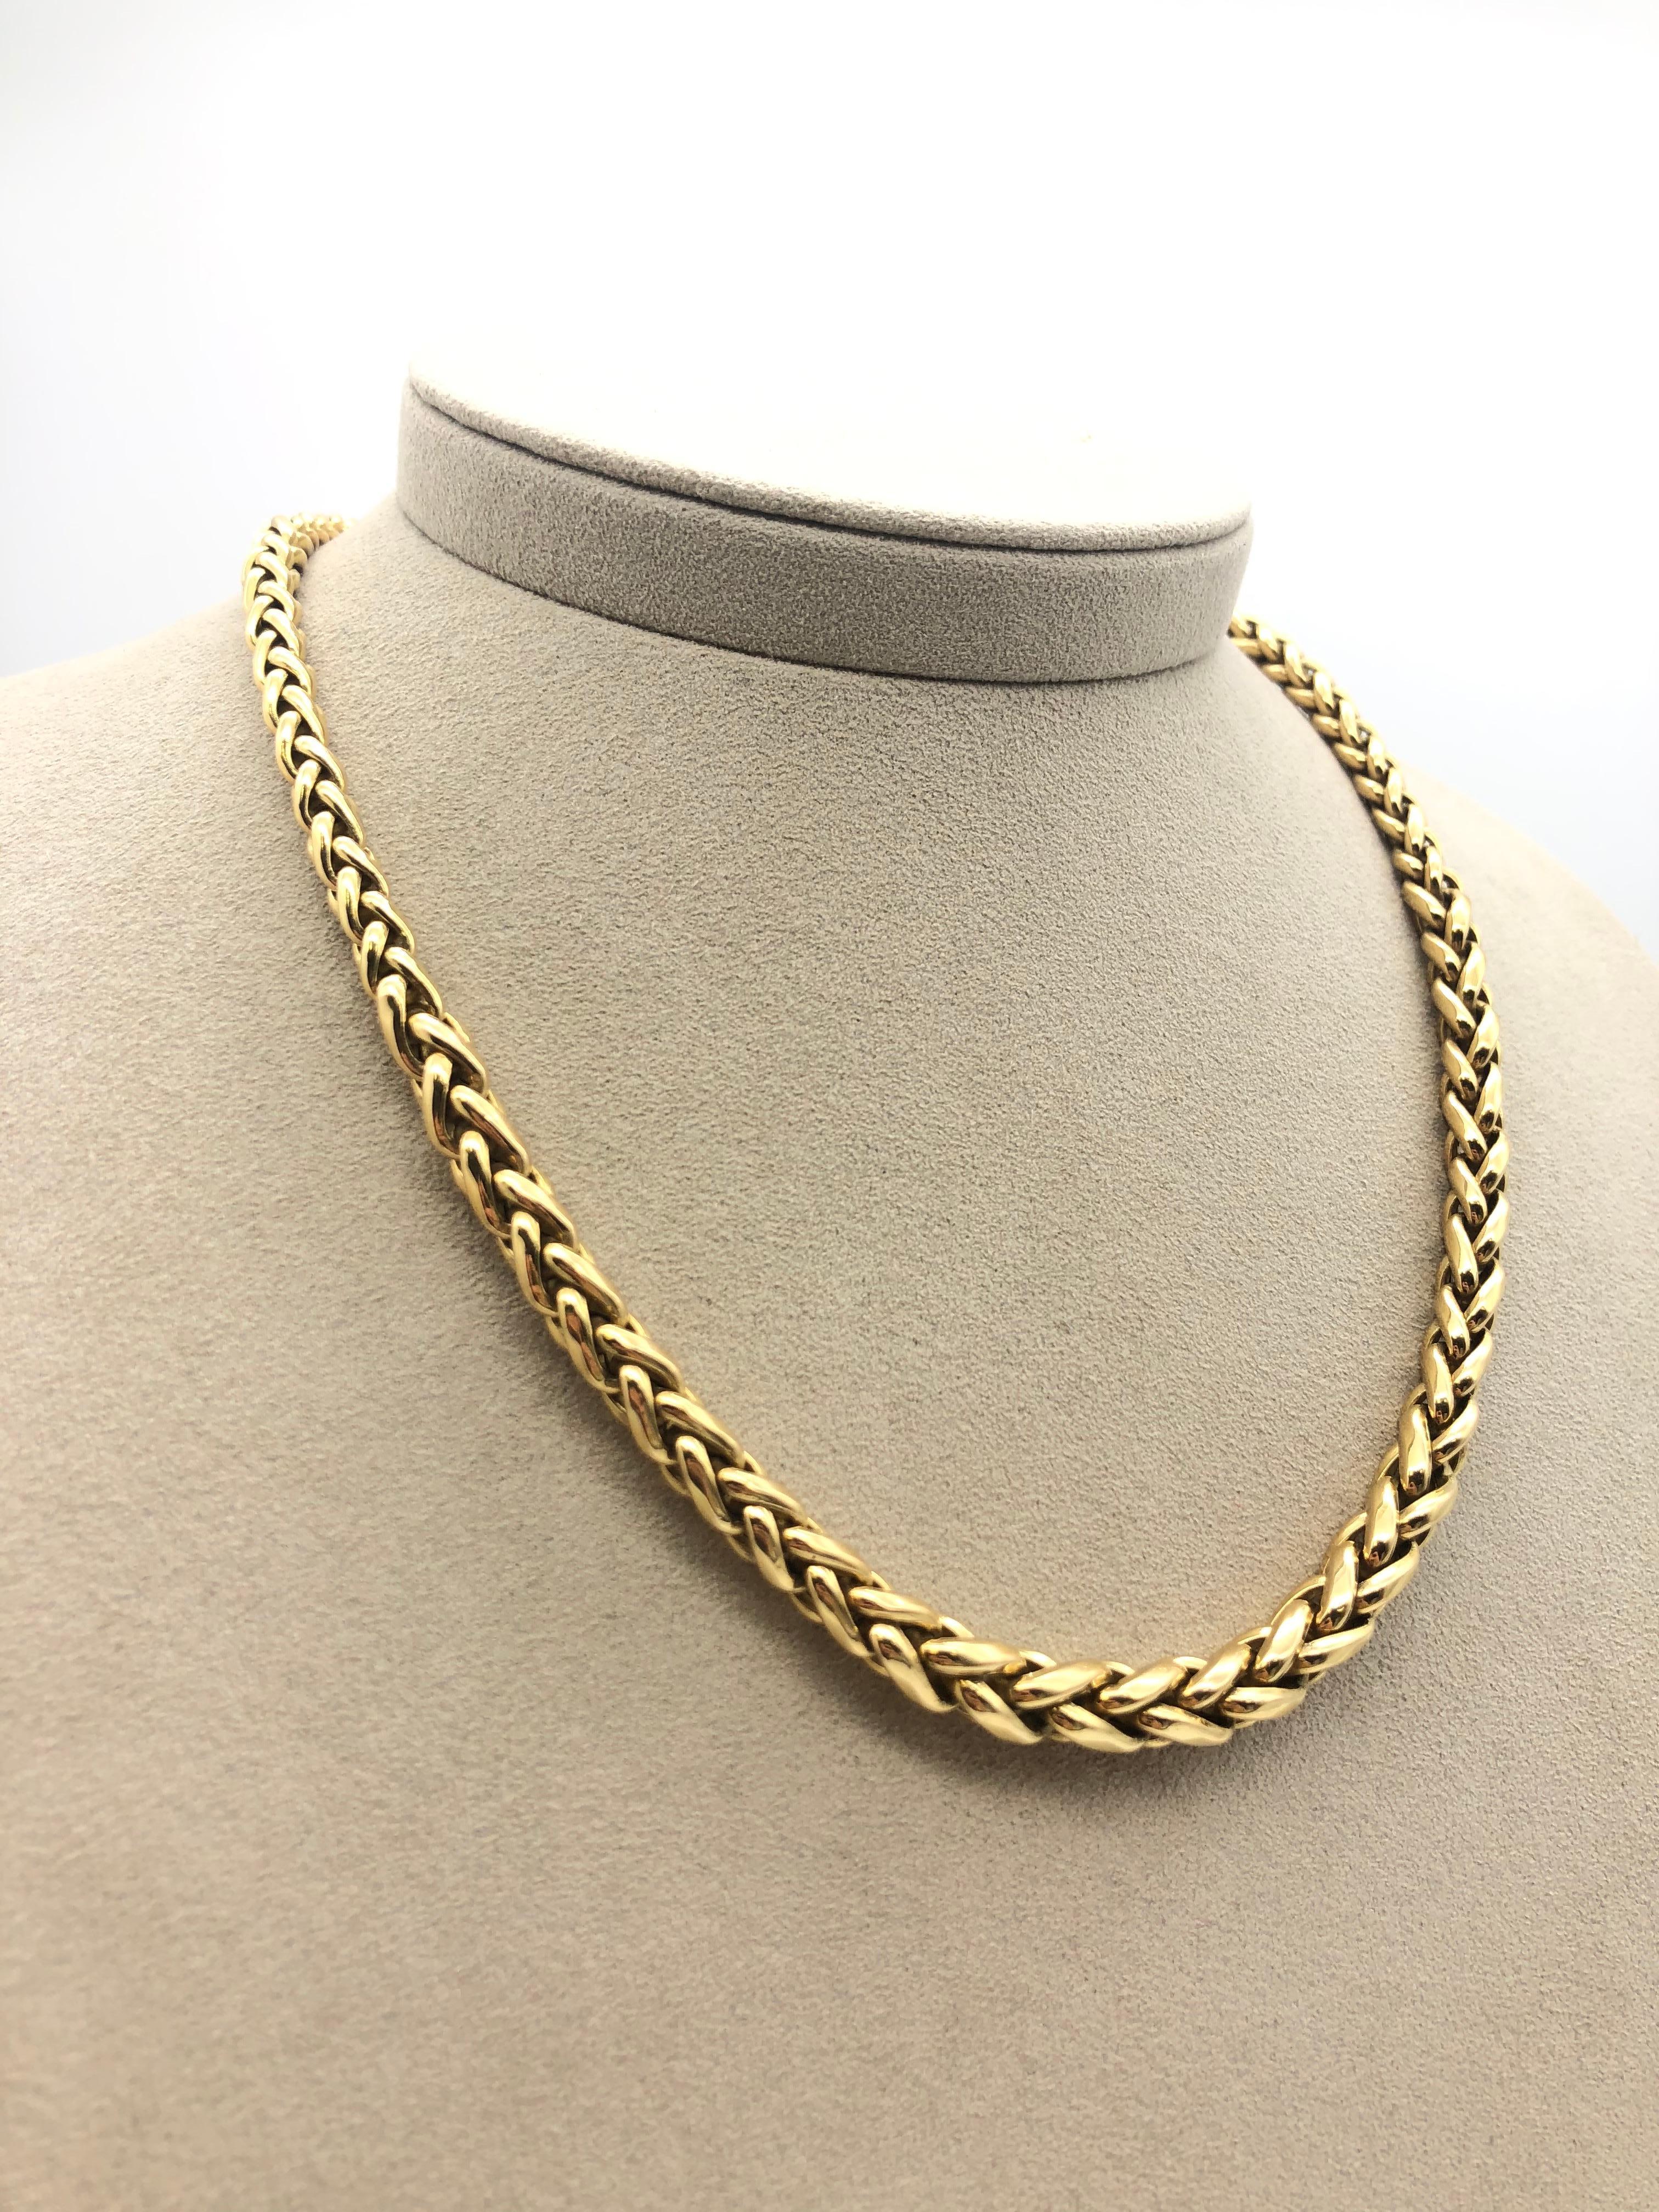 Yellow Gold 18 k Necklace 
Palm Mesh
Weight Of Gold : 30.1 Grams 18 carats
Lobster Clasp
Length 45 cm / 17,7 inch
Circa 80's